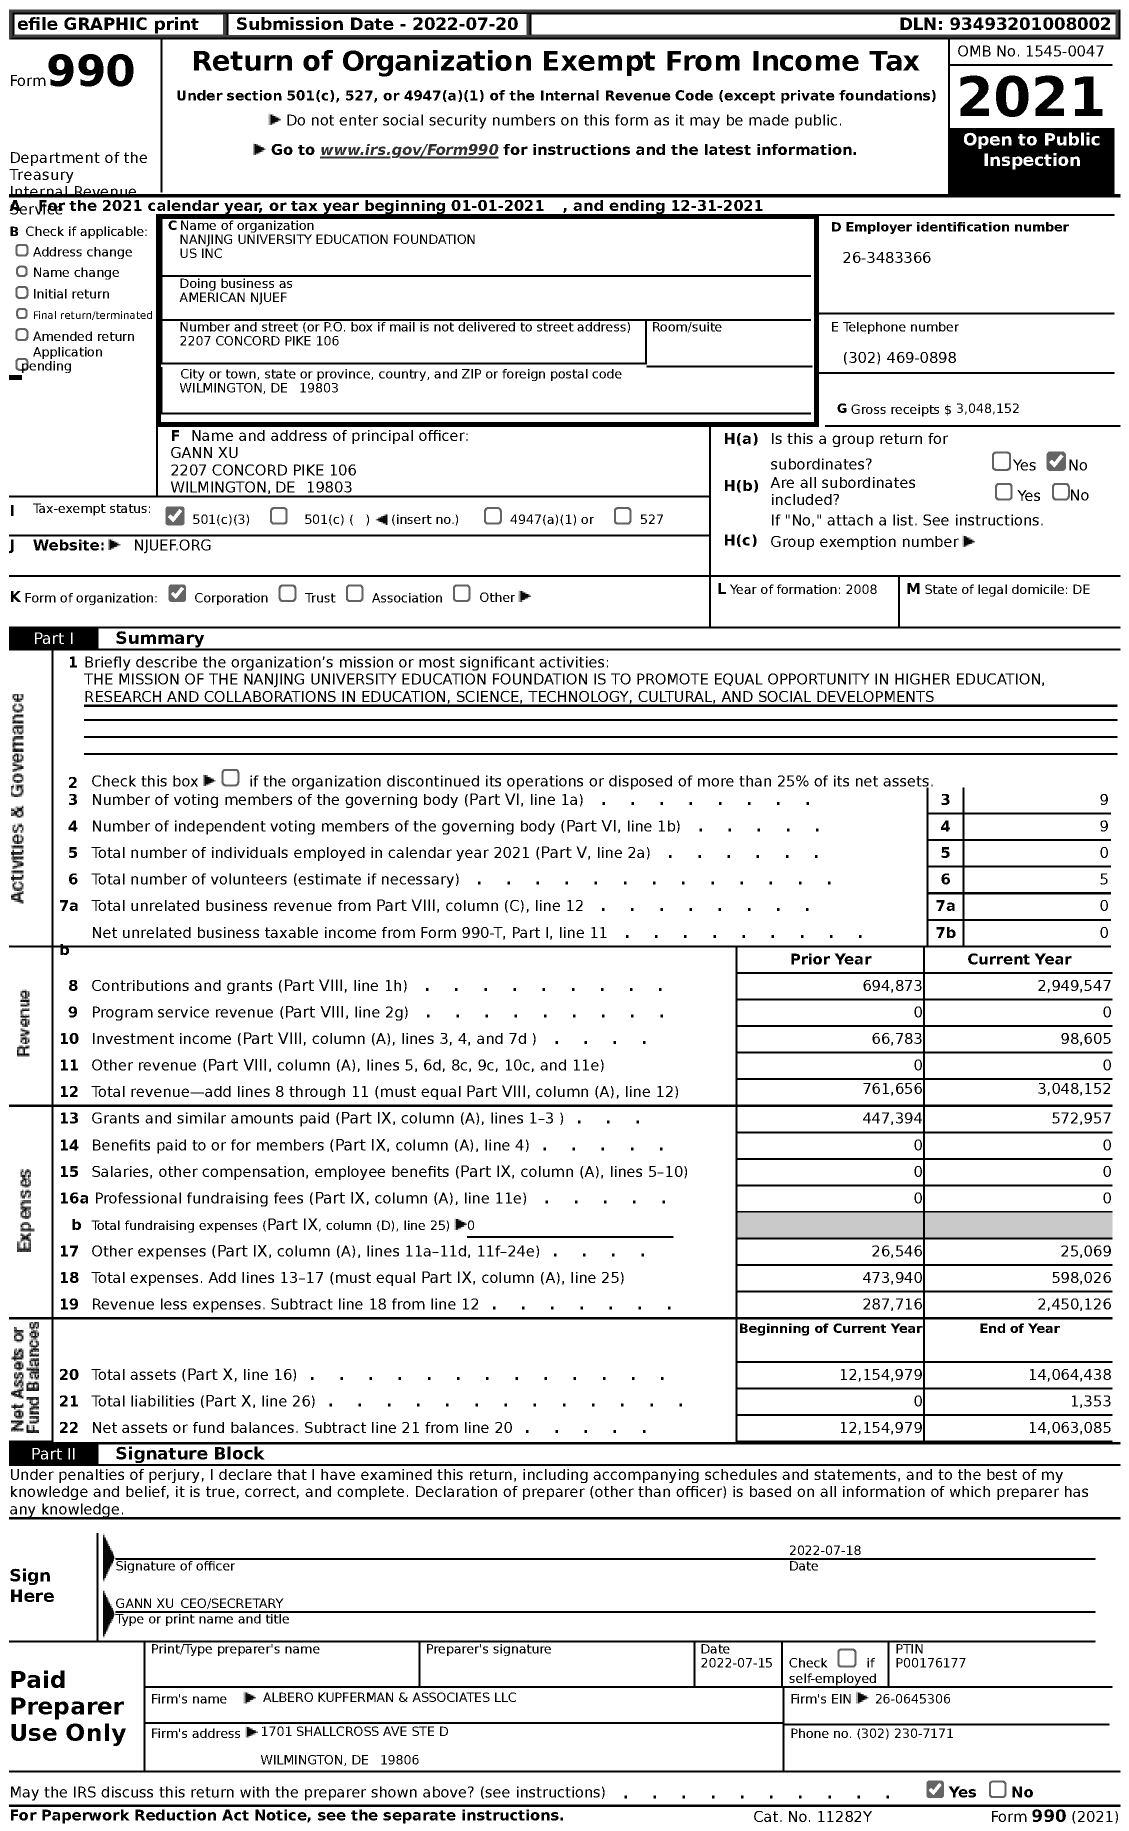 Image of first page of 2021 Form 990 for American Njuef